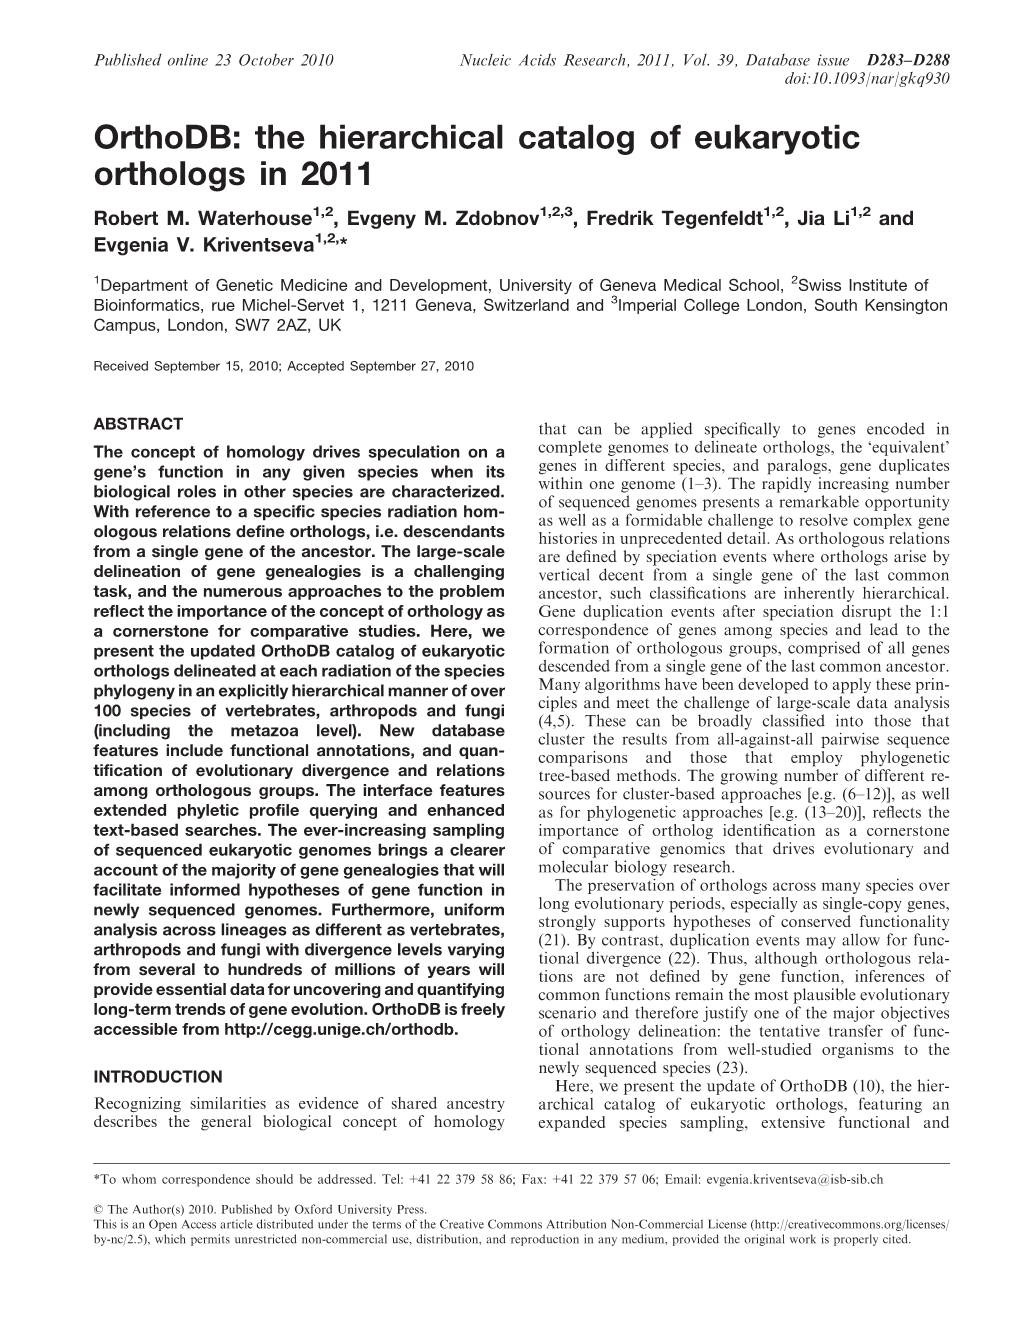 Orthodb: the Hierarchical Catalog of Eukaryotic Orthologs in 2011 Robert M